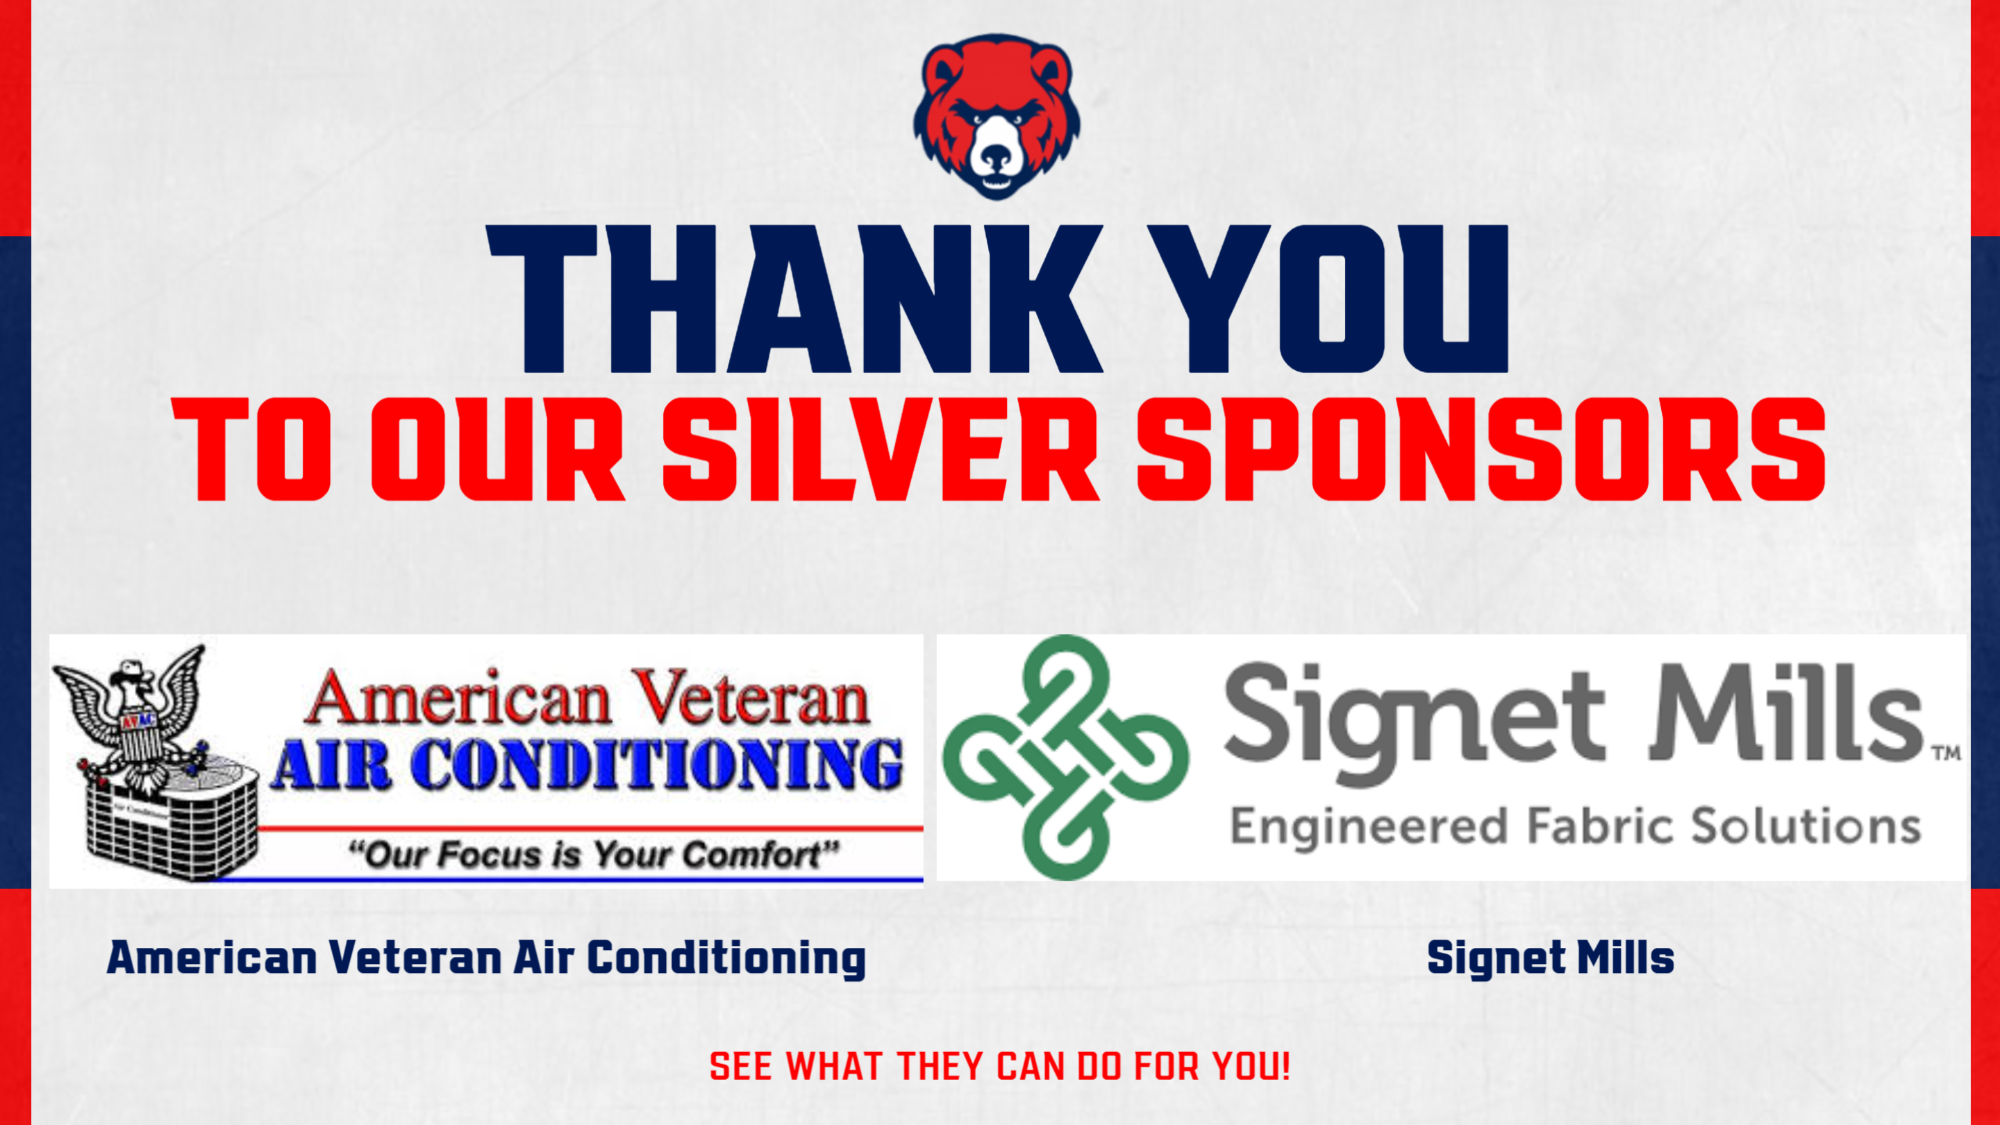 1710528698_SilverSponsors4084058.png - Image for Thank you to our Silver Sponsors